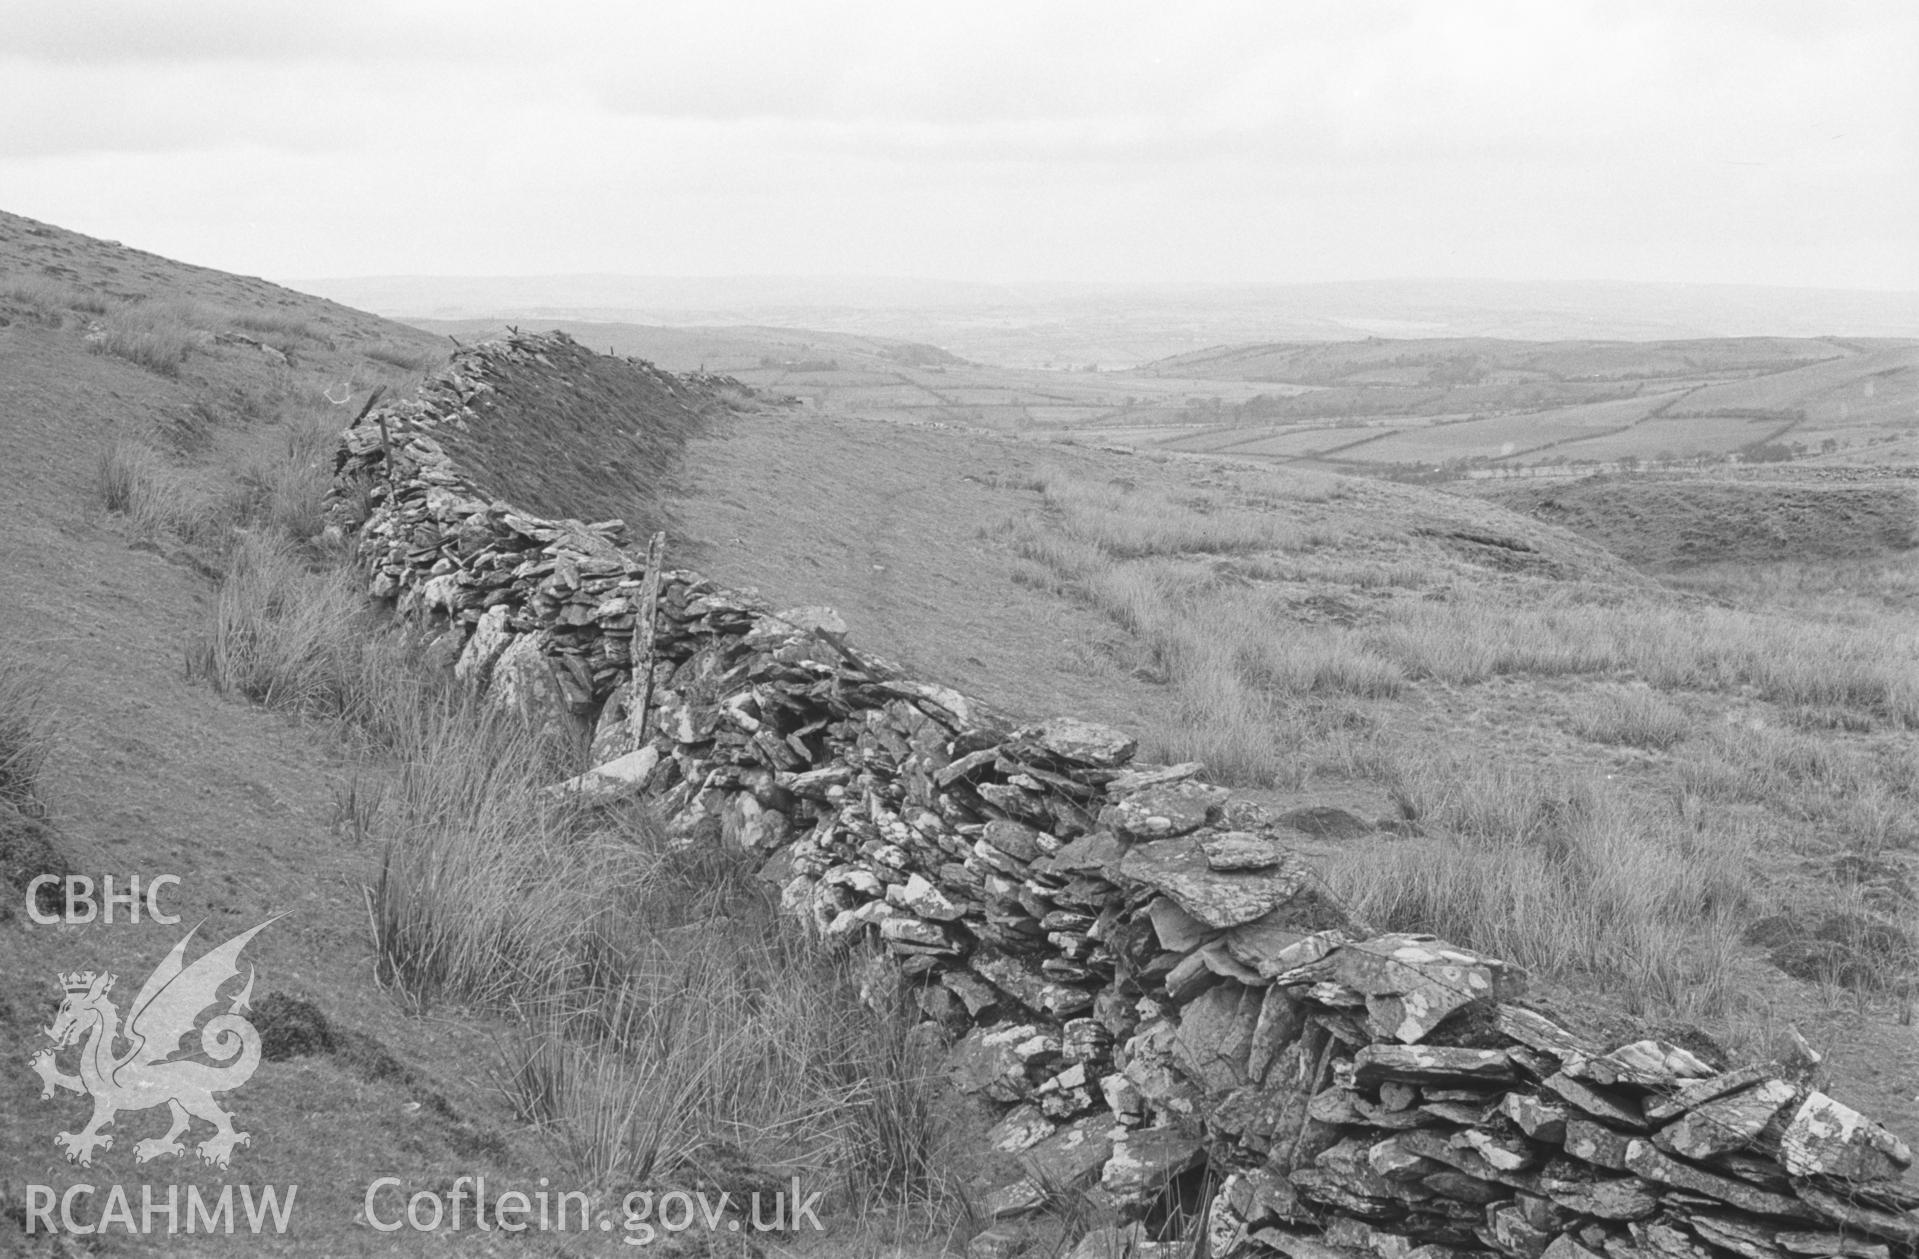 Digital copy of black & white negative showing dry stone wall separating field from track 300m south west of the ruins of Tan-y-Graig. Photographed by Arthur O. Chater on 6th April 1966 from Grid Reference SN 727 604, looking north.